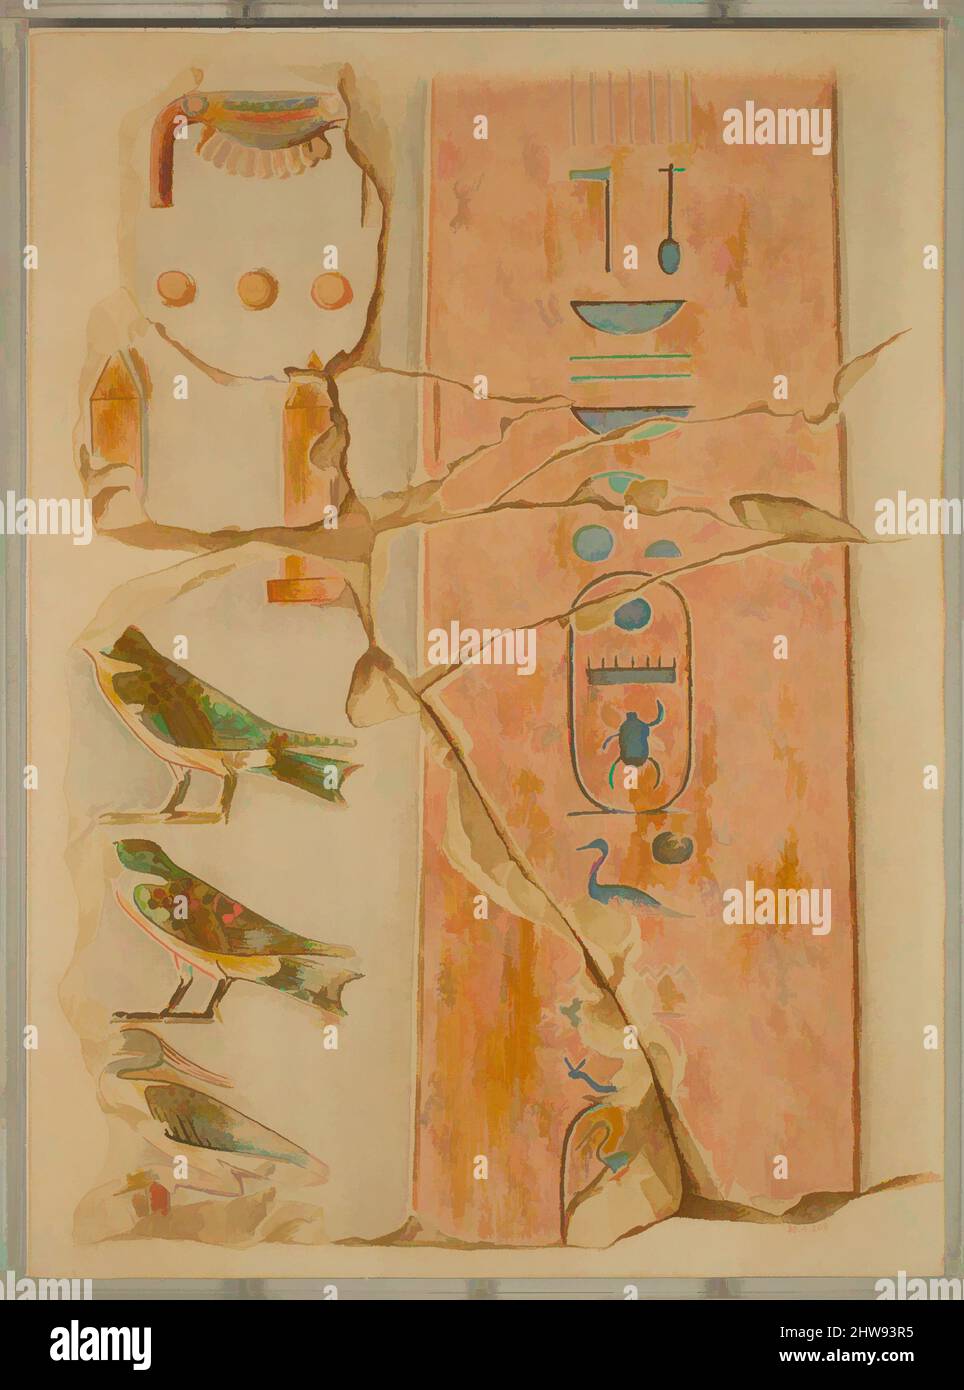 Art inspired by Fragment of an Obelisk, Tomb of Puyemre, Original: New Kingdom, Dynasty 18, ca. 1479–1458 B.C., Original from Egypt, Upper Egypt, Thebes, Tomb of Puyemre, West wall, north of central doorway, Tempera on paper, H. 32.4 cm (12 3/4 in); w. 23.8 cm (9 3/8 in), Hugh R, Classic works modernized by Artotop with a splash of modernity. Shapes, color and value, eye-catching visual impact on art. Emotions through freedom of artworks in a contemporary way. A timeless message pursuing a wildly creative new direction. Artists turning to the digital medium and creating the Artotop NFT Stock Photo